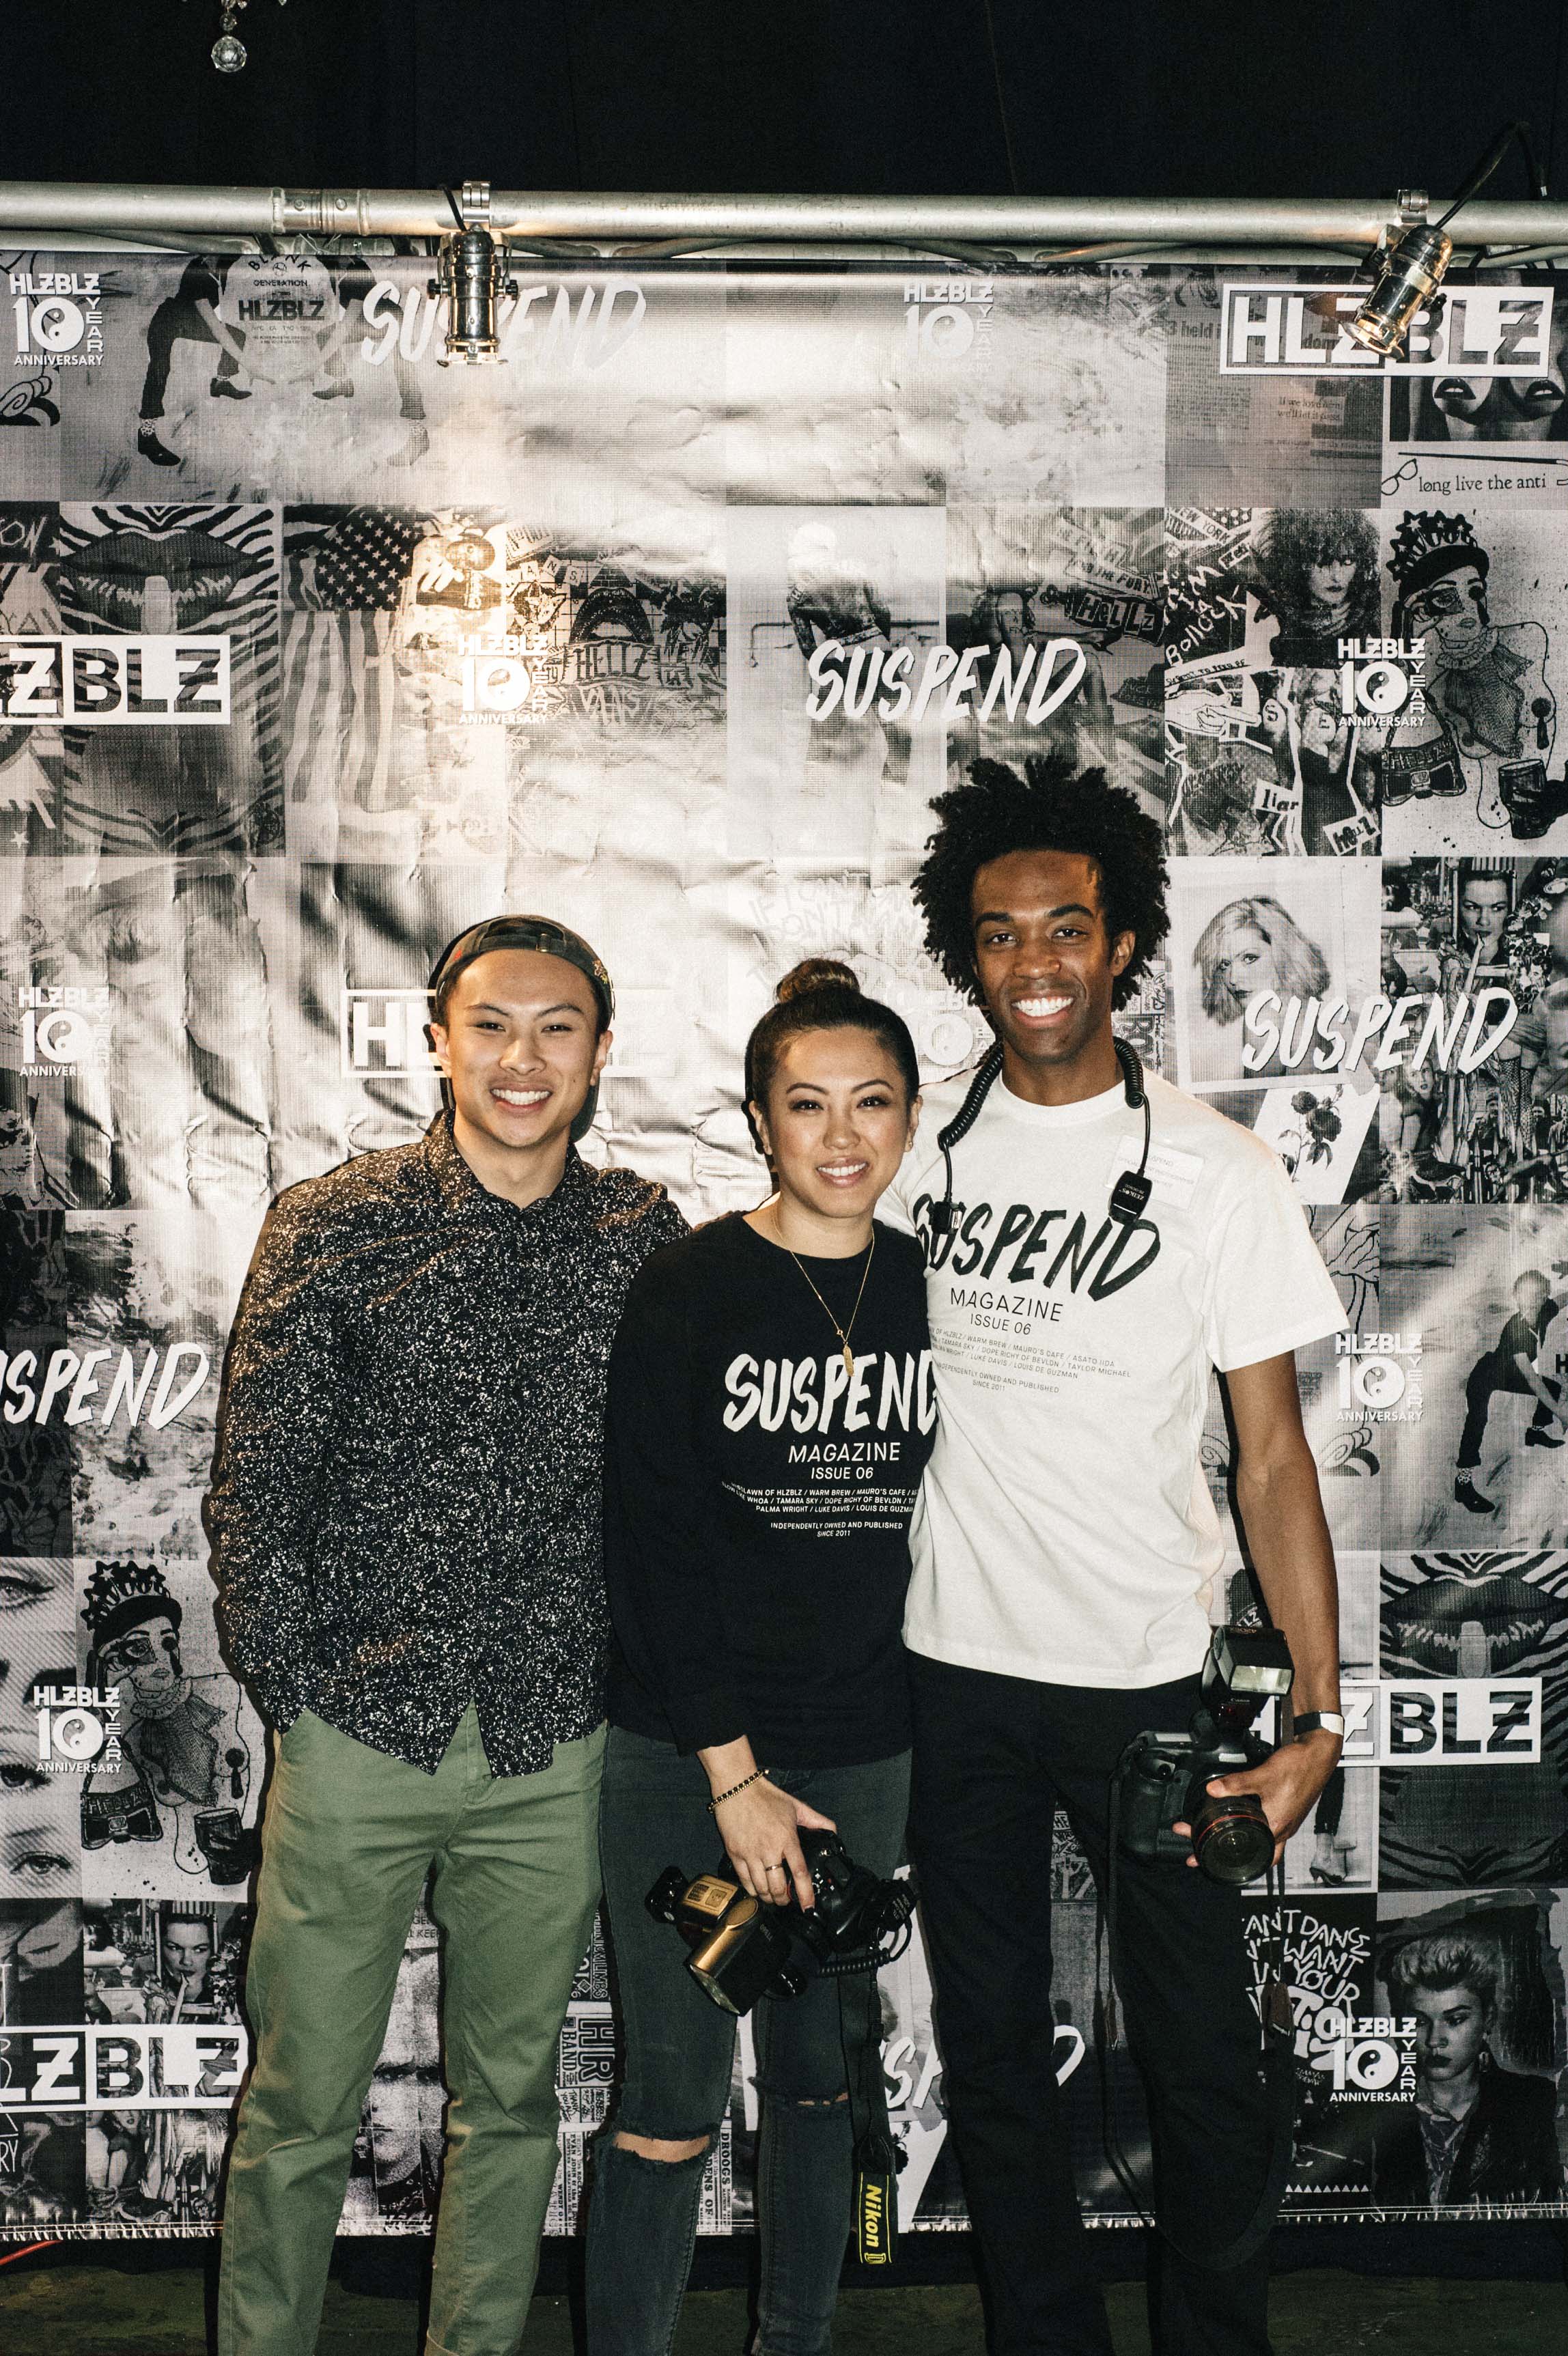  Jordan Abapo, &nbsp;EIC Diane Abapo and Jonathan Tate at the ISSUE 06 Launch x HLZBLZ 10Year Anniversary (Feb 11) at Globe Theater. / Photo: © Jordan Abapo for SUSPEND Magazine 